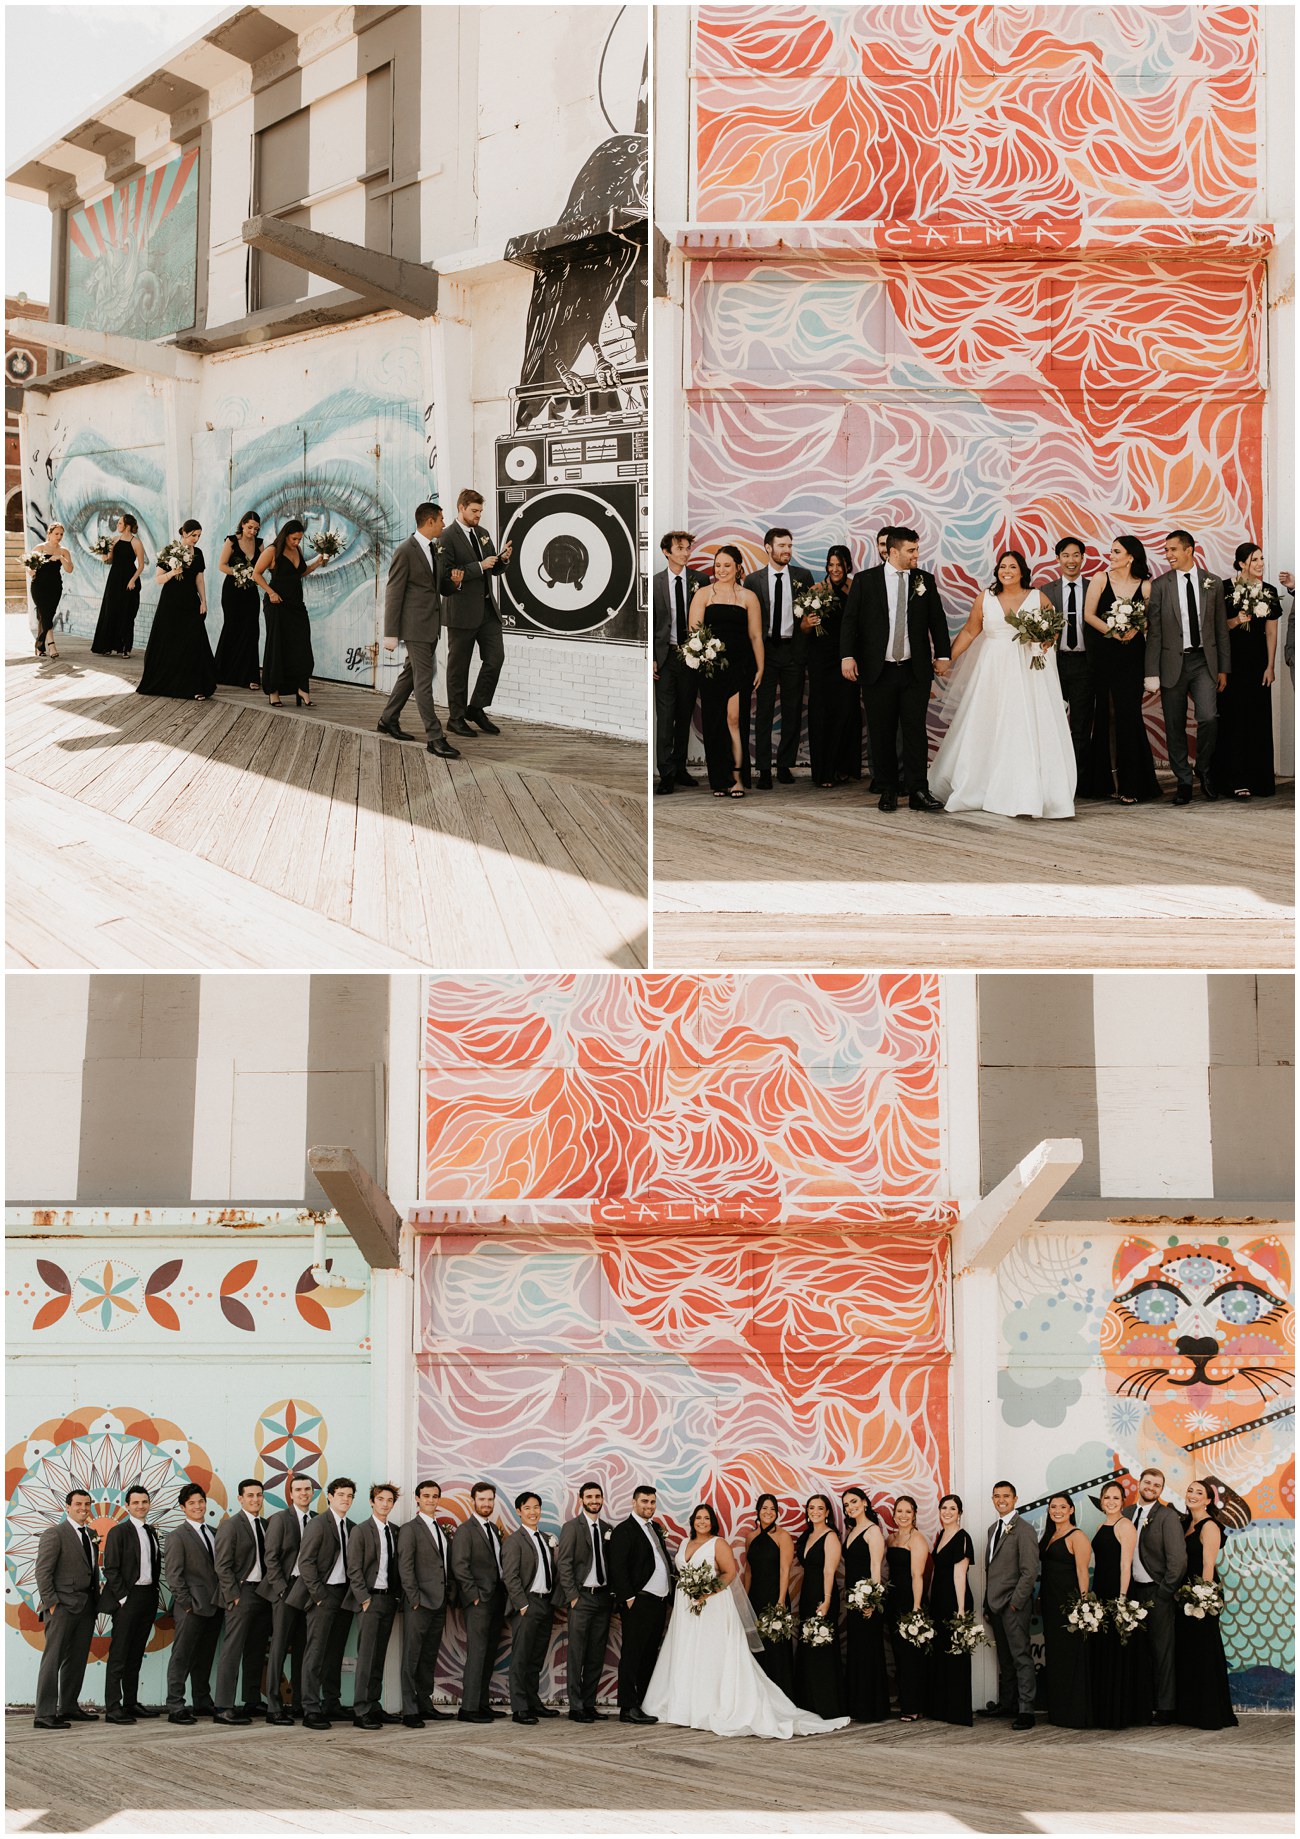 Collage of Bride and Groom with their bridal party in front of mural wall on the Asbury Park boardwalk